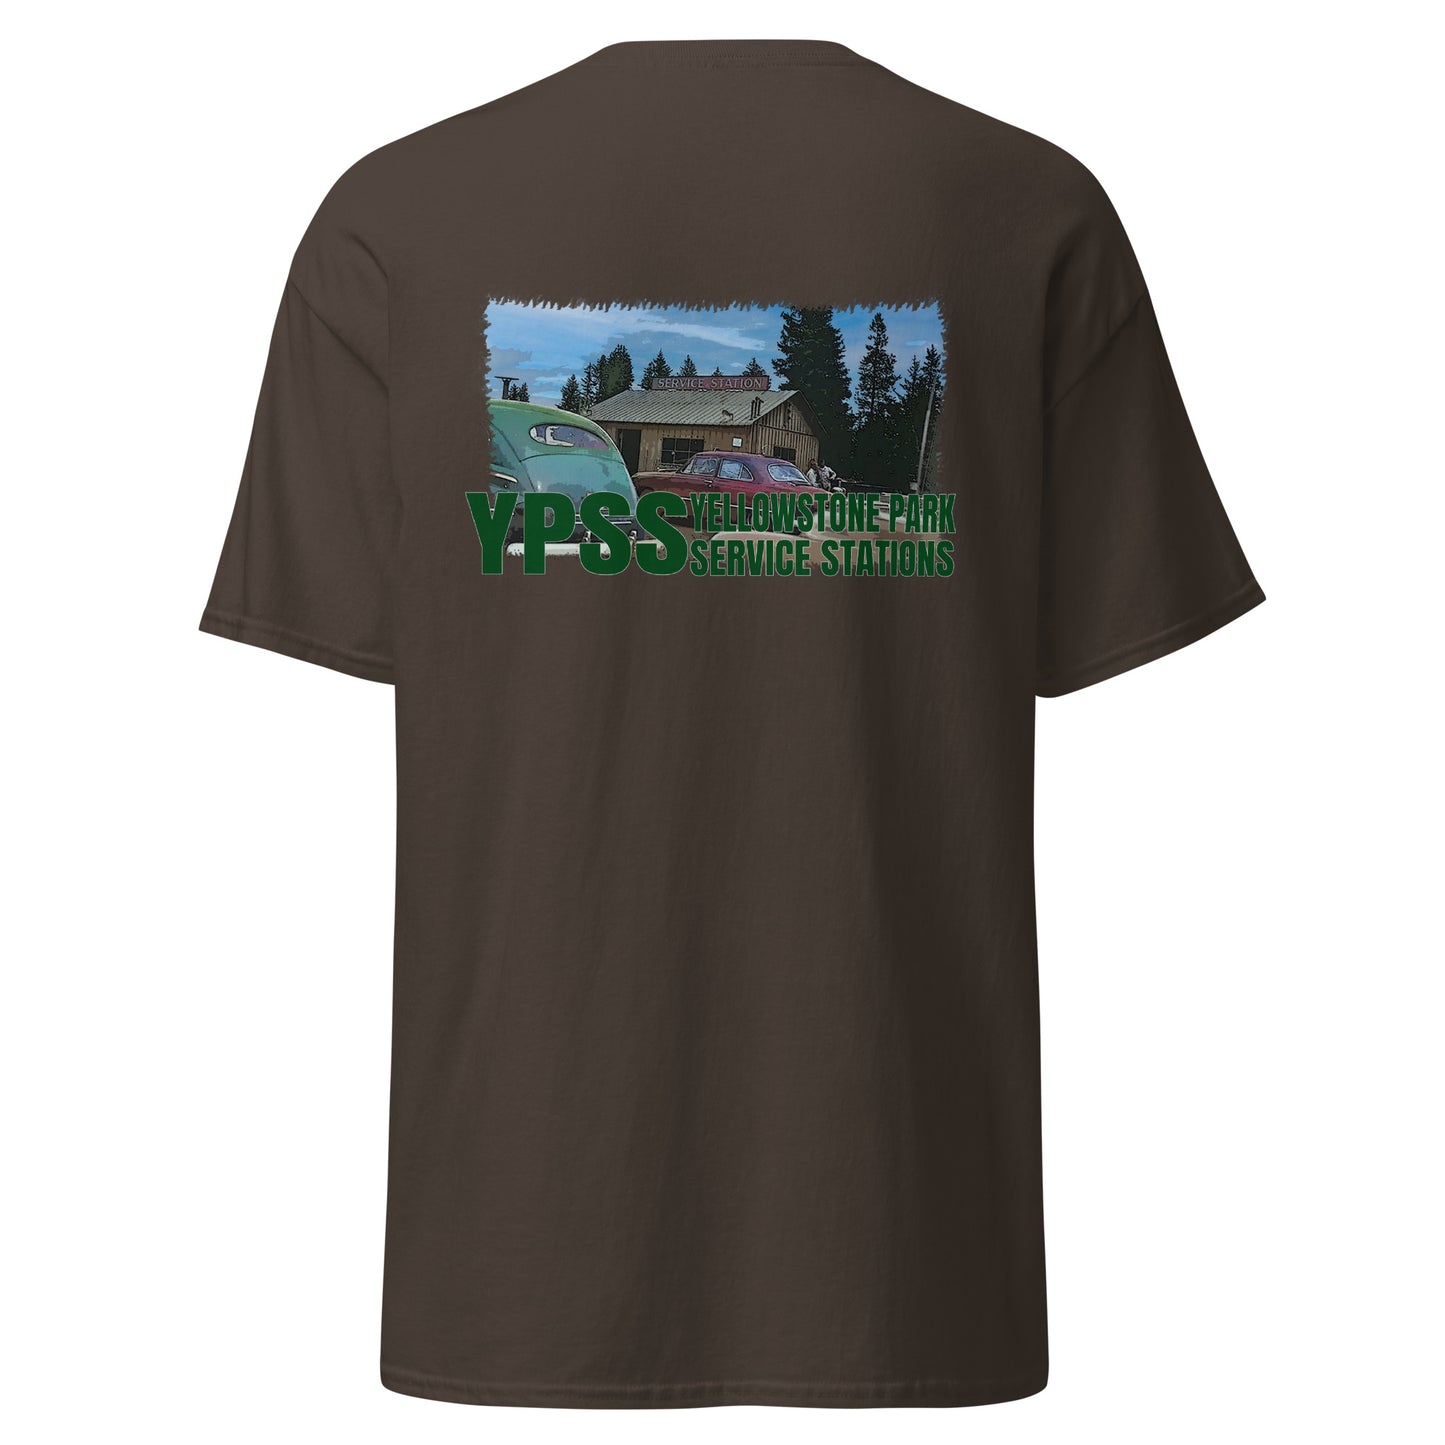 YPSS Yellowstone Park Service Stations - West Thumb Station - Classic Tee